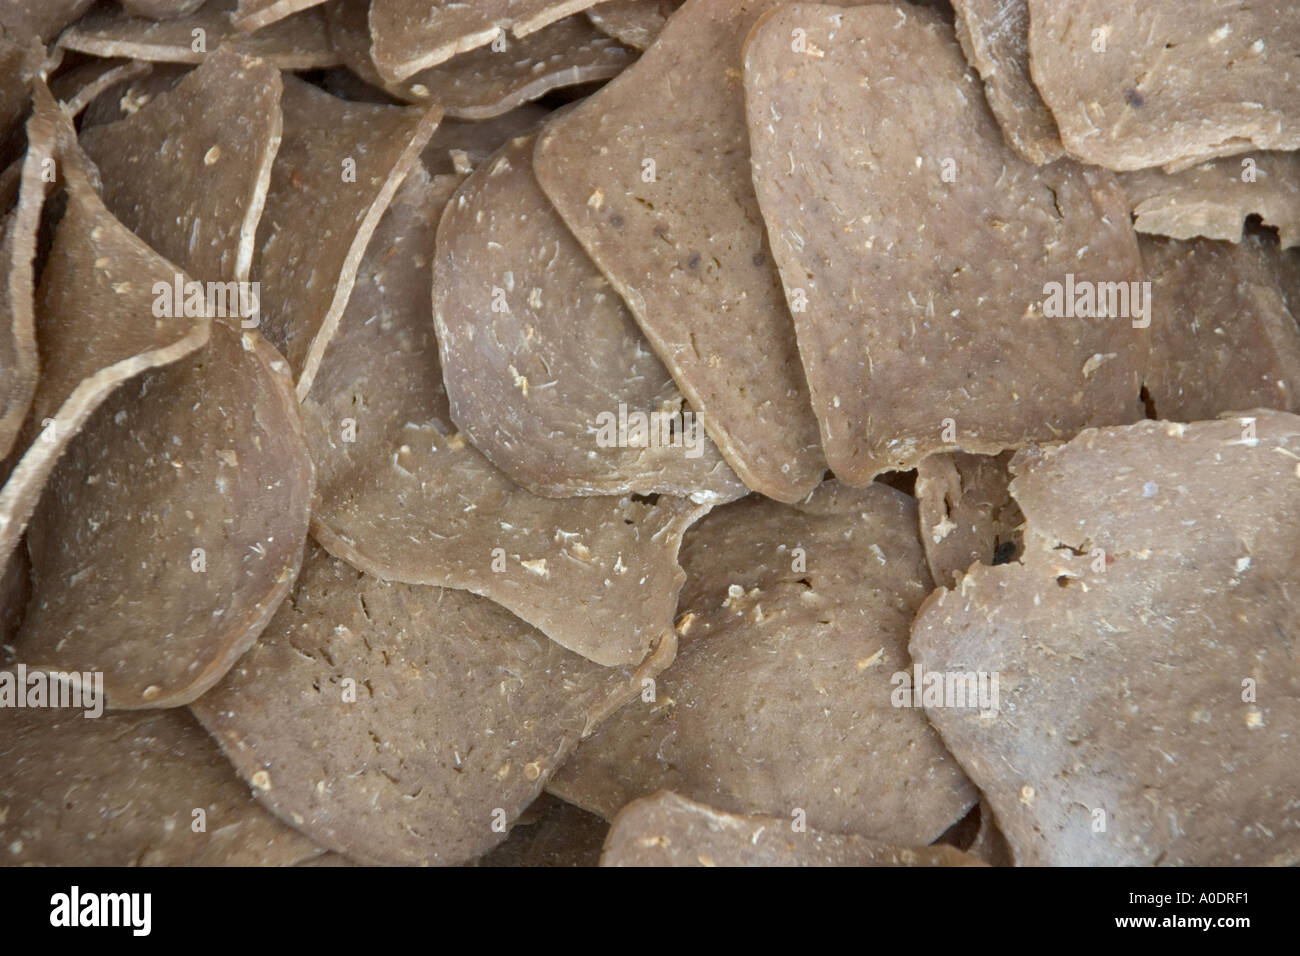 Dried fish crackers on sale in Singapore s Chinatown Stock Photo